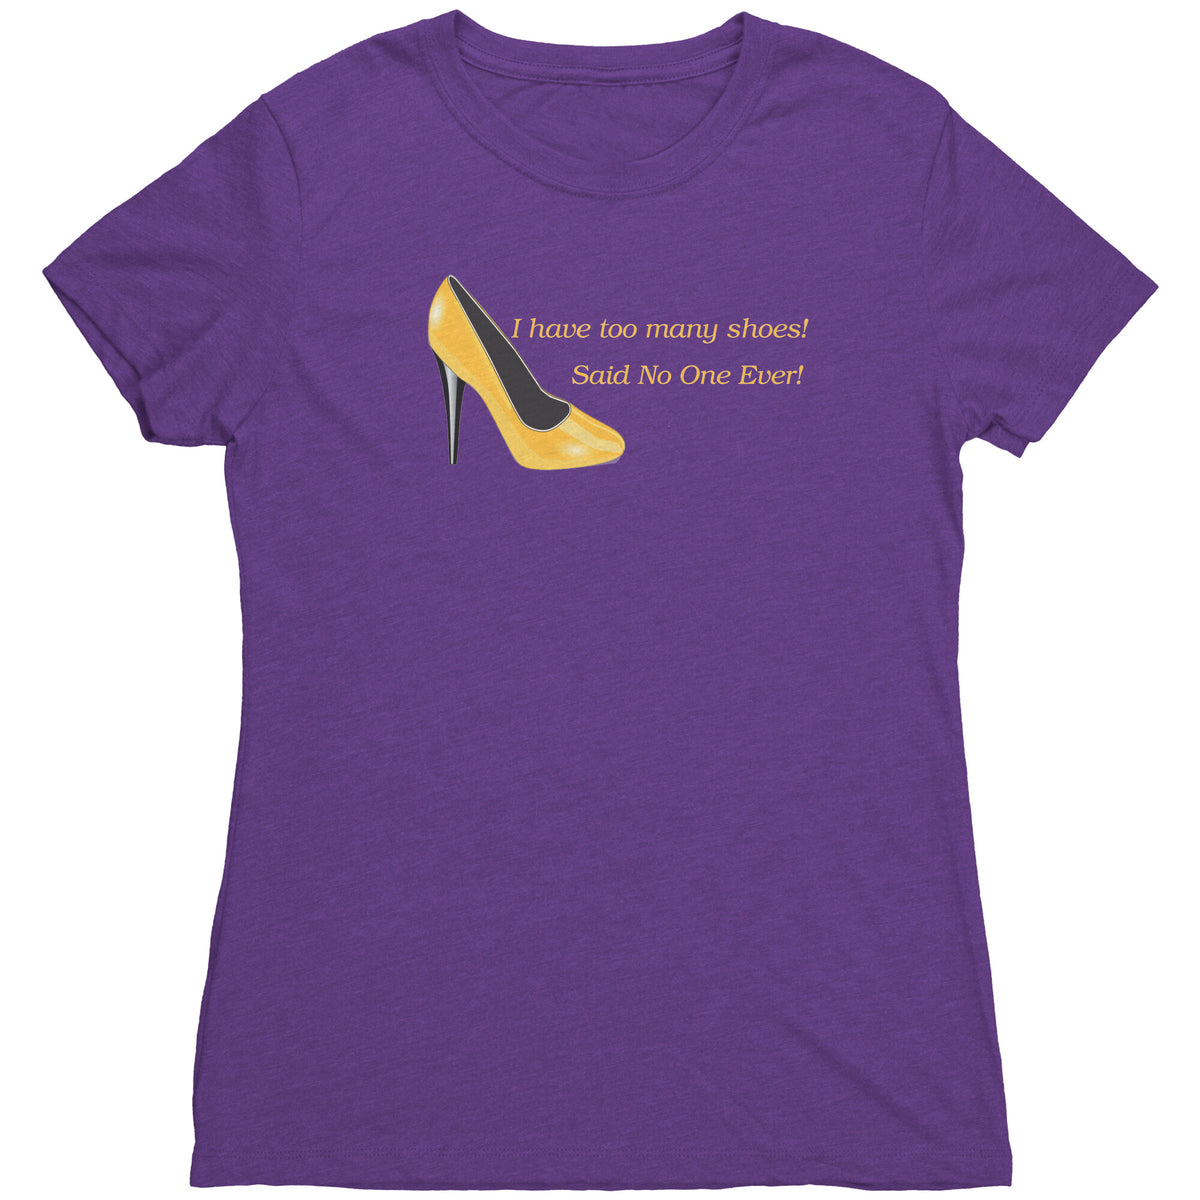 I Have Too many Shoes! Said No One Ever! - Women's Triblend TShirt